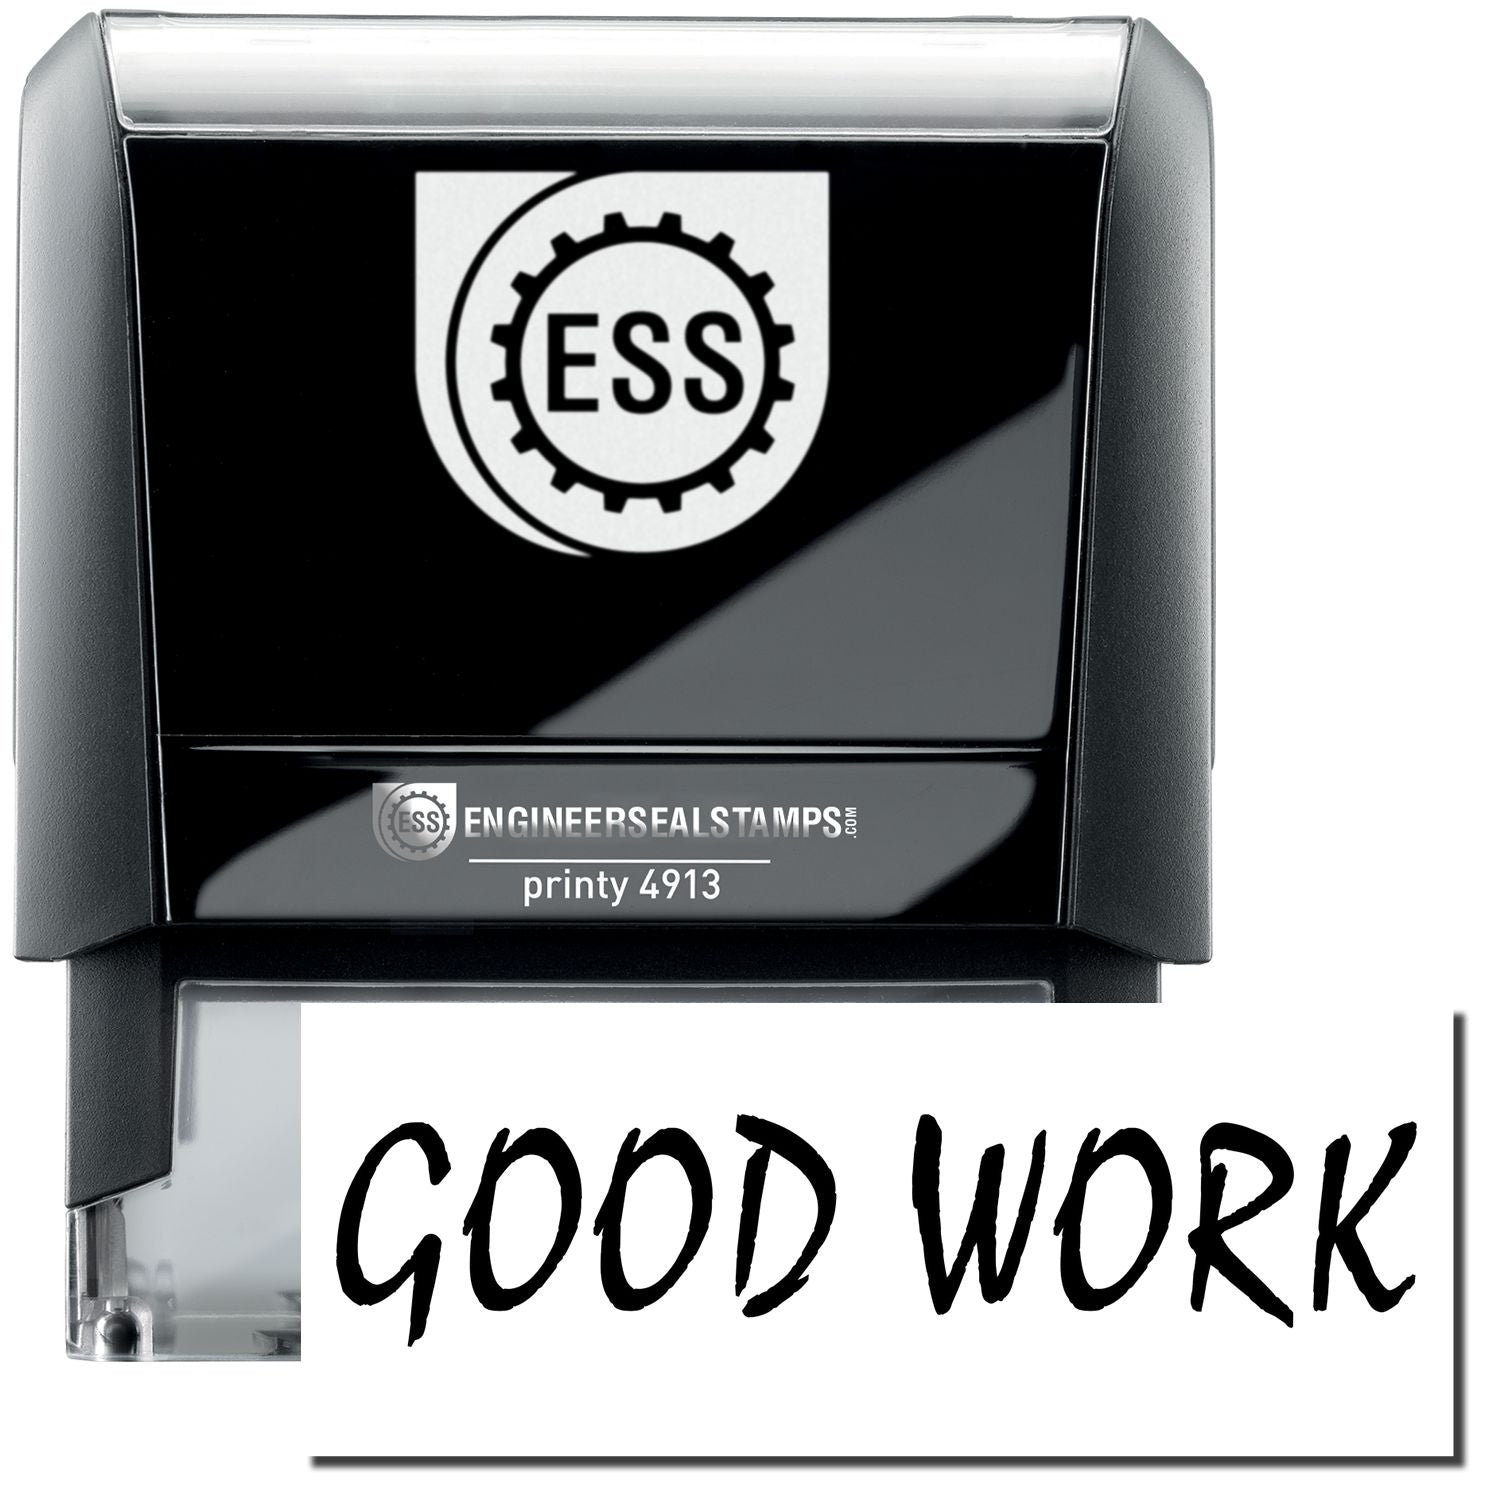 A self-inking stamp with a stamped image showing how the text "GOOD WORK" in a unique large bold font is displayed by it.